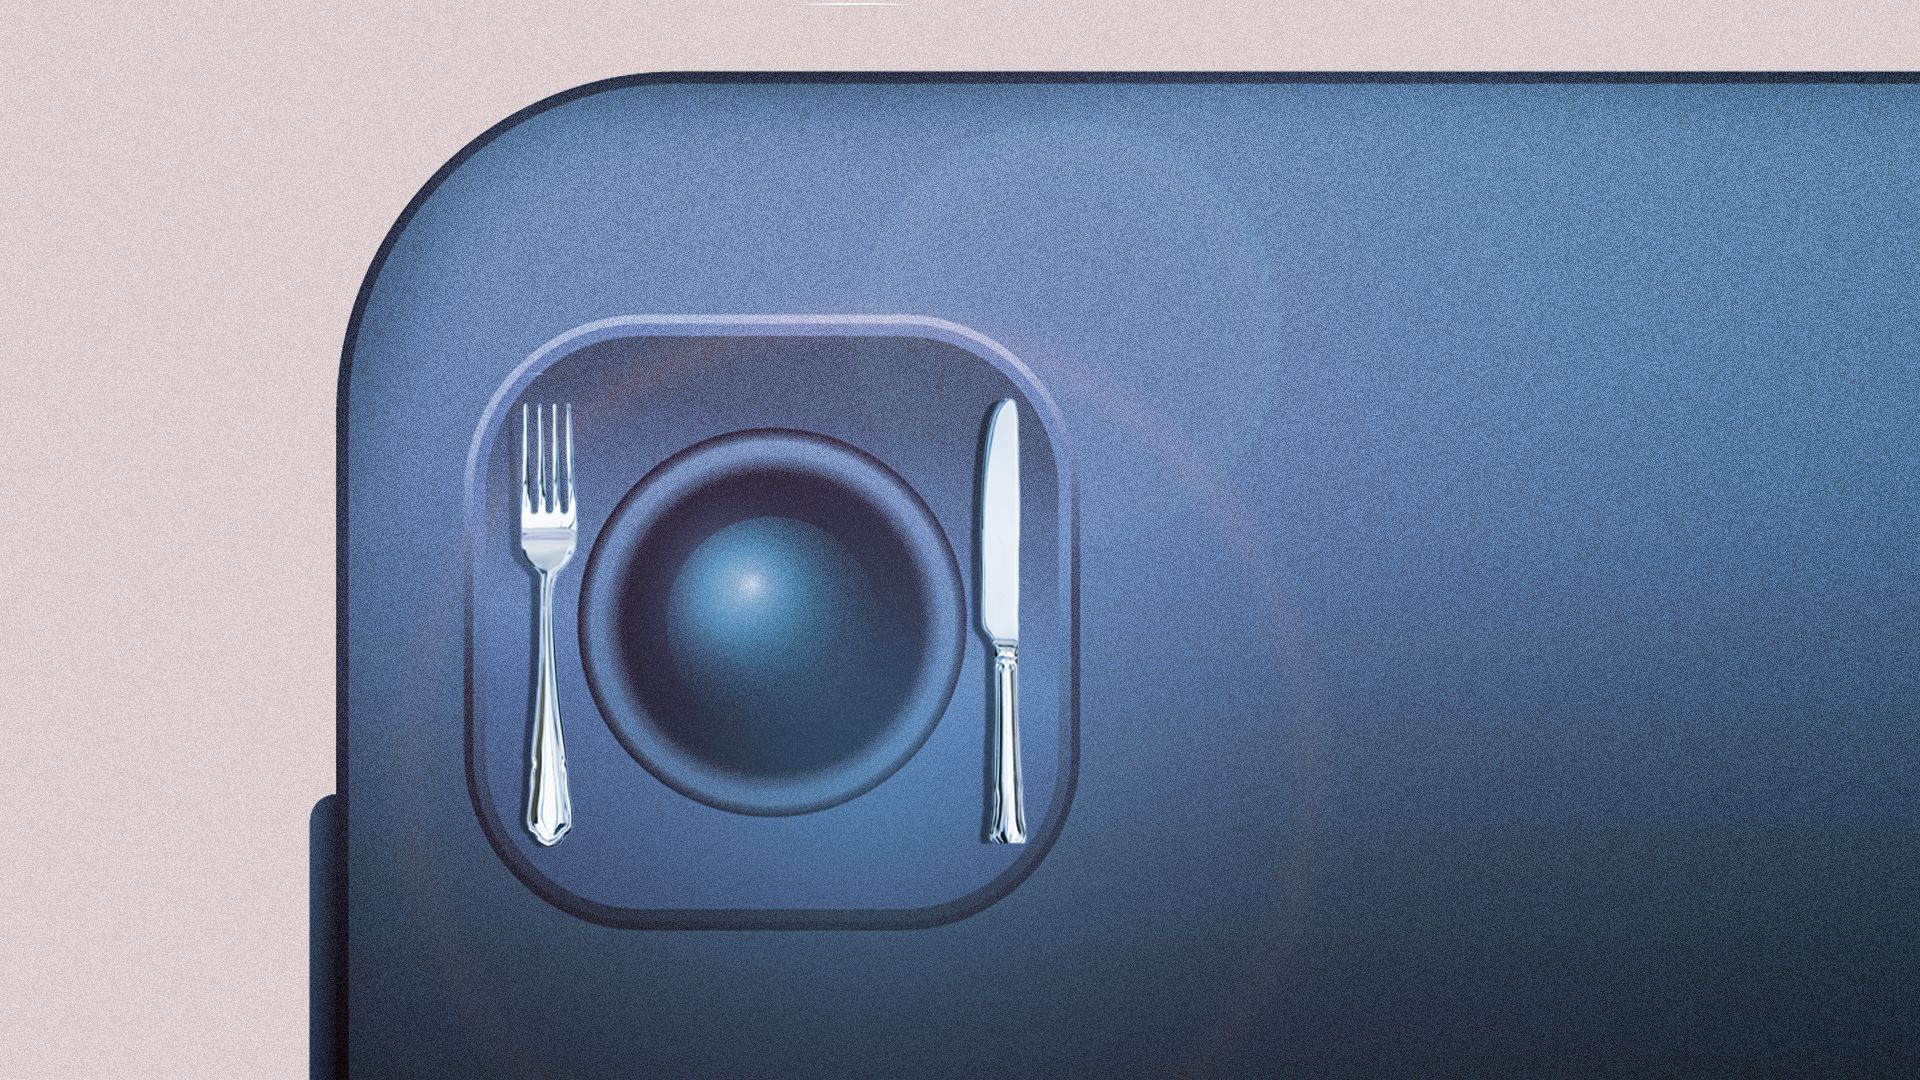 Illustration of the back of a smart phone with a knife and fork on either side of the camera lens, as if the lens were a plate.